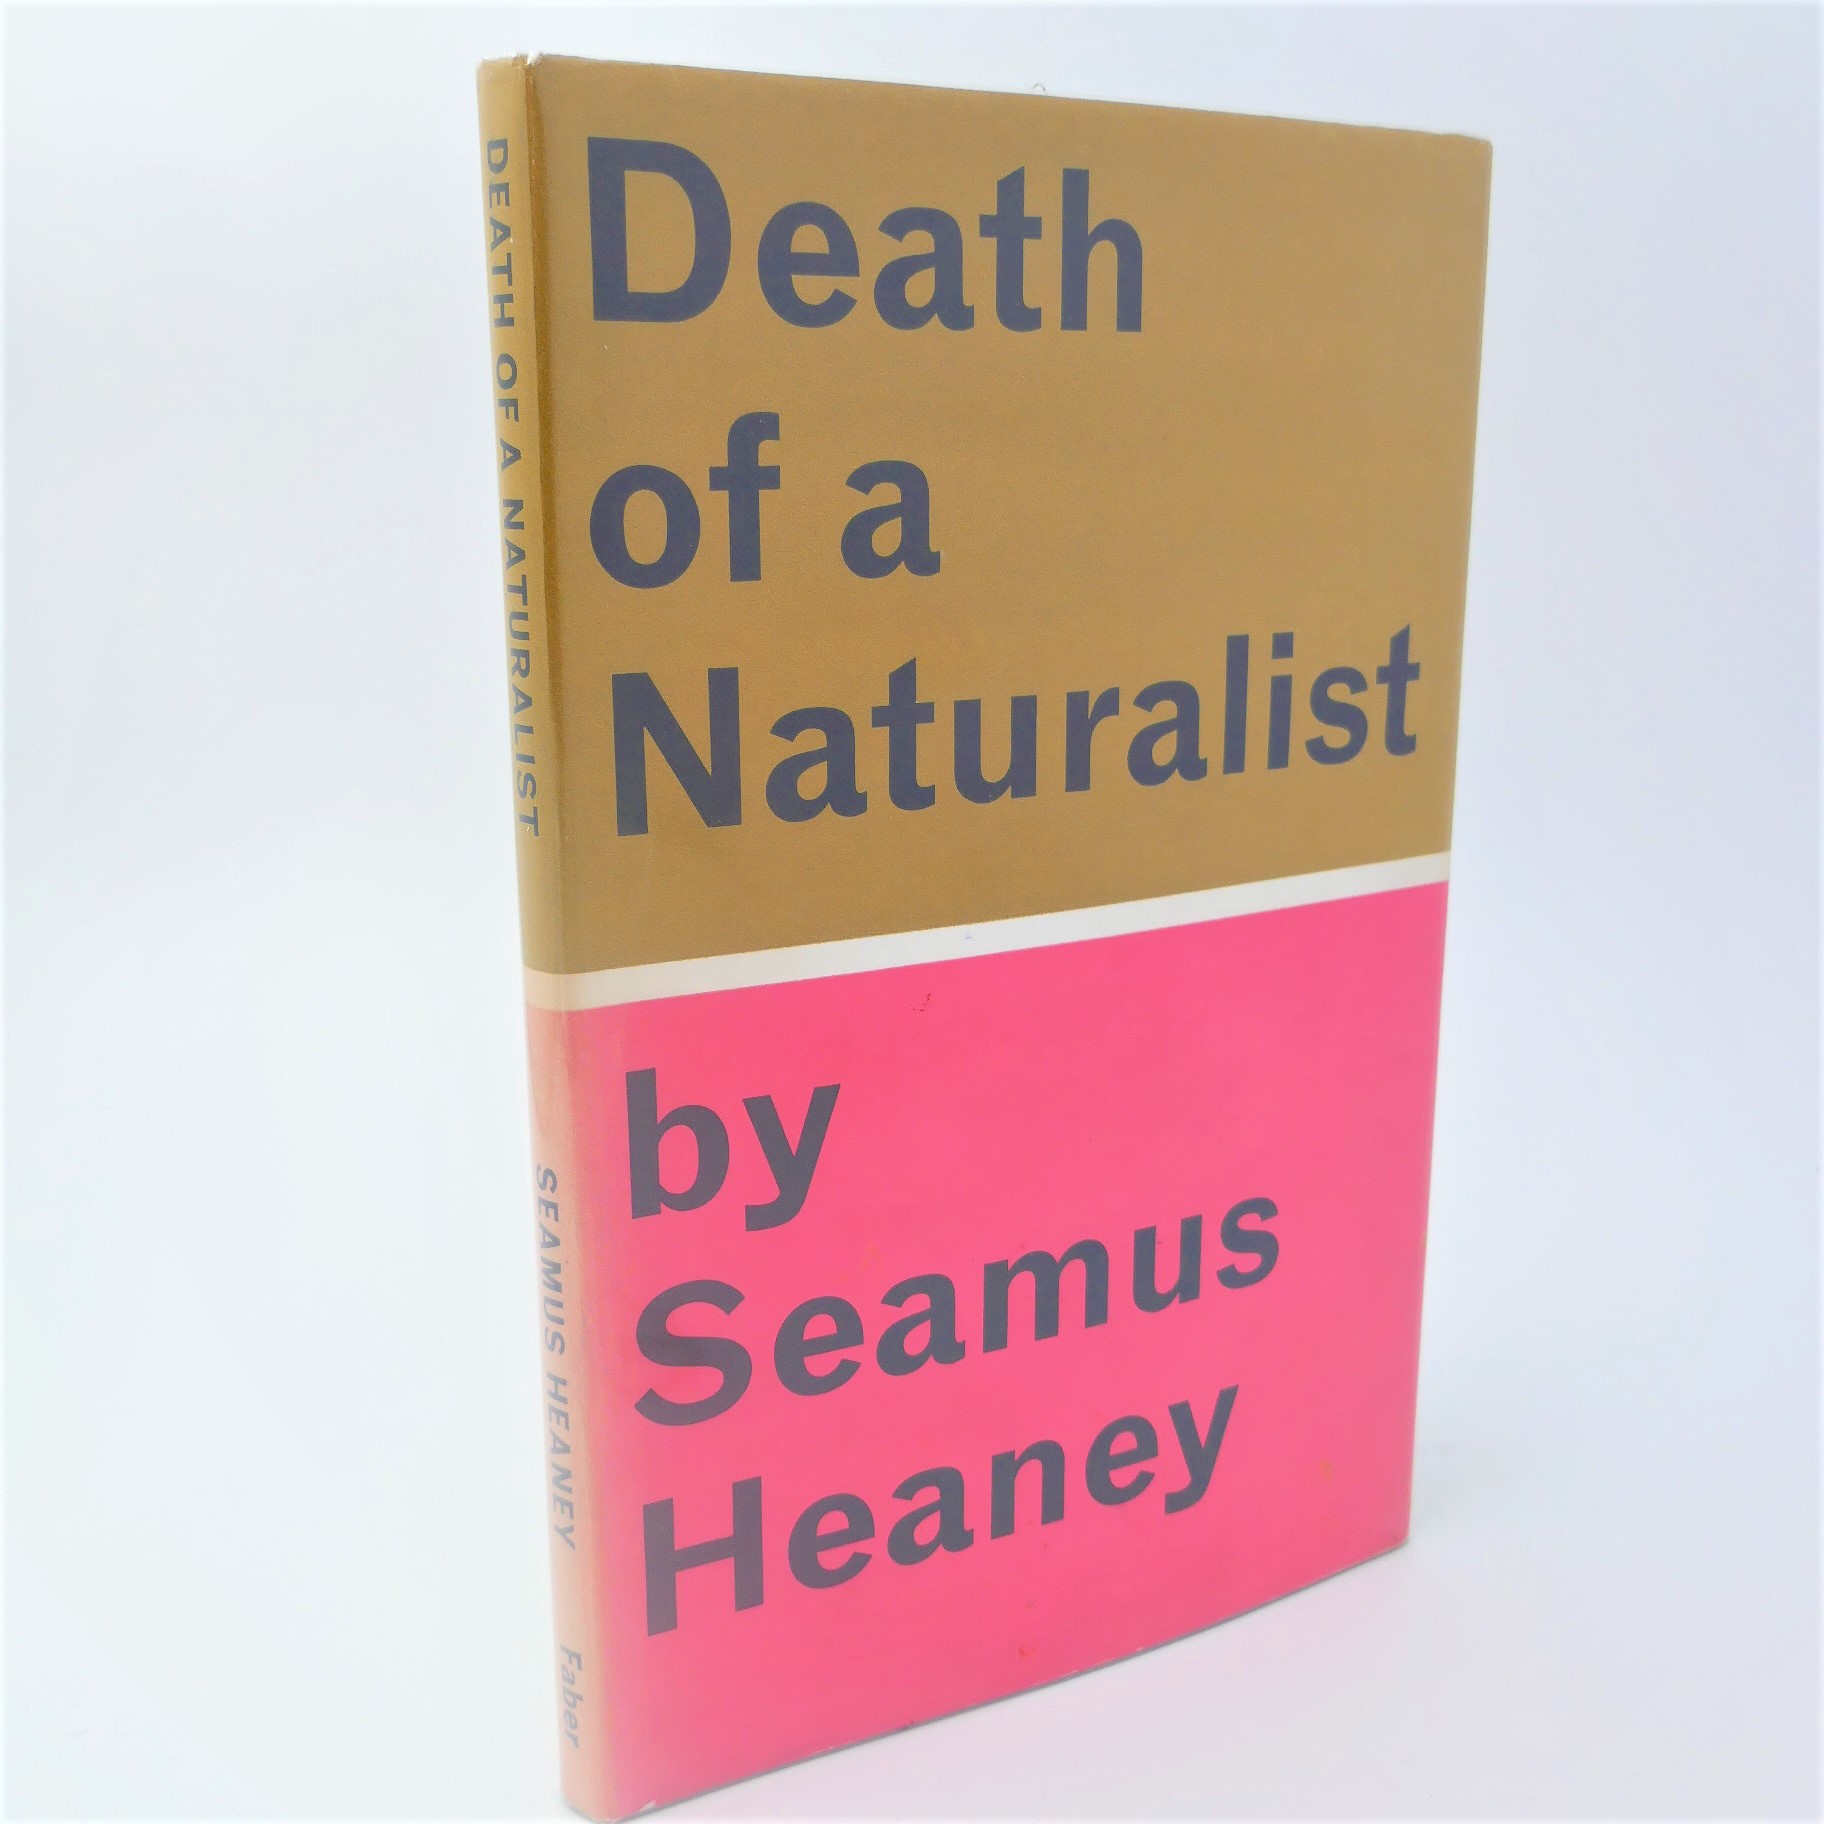 Death of a Naturalist. First Edition (1966) by Seamus Heaney